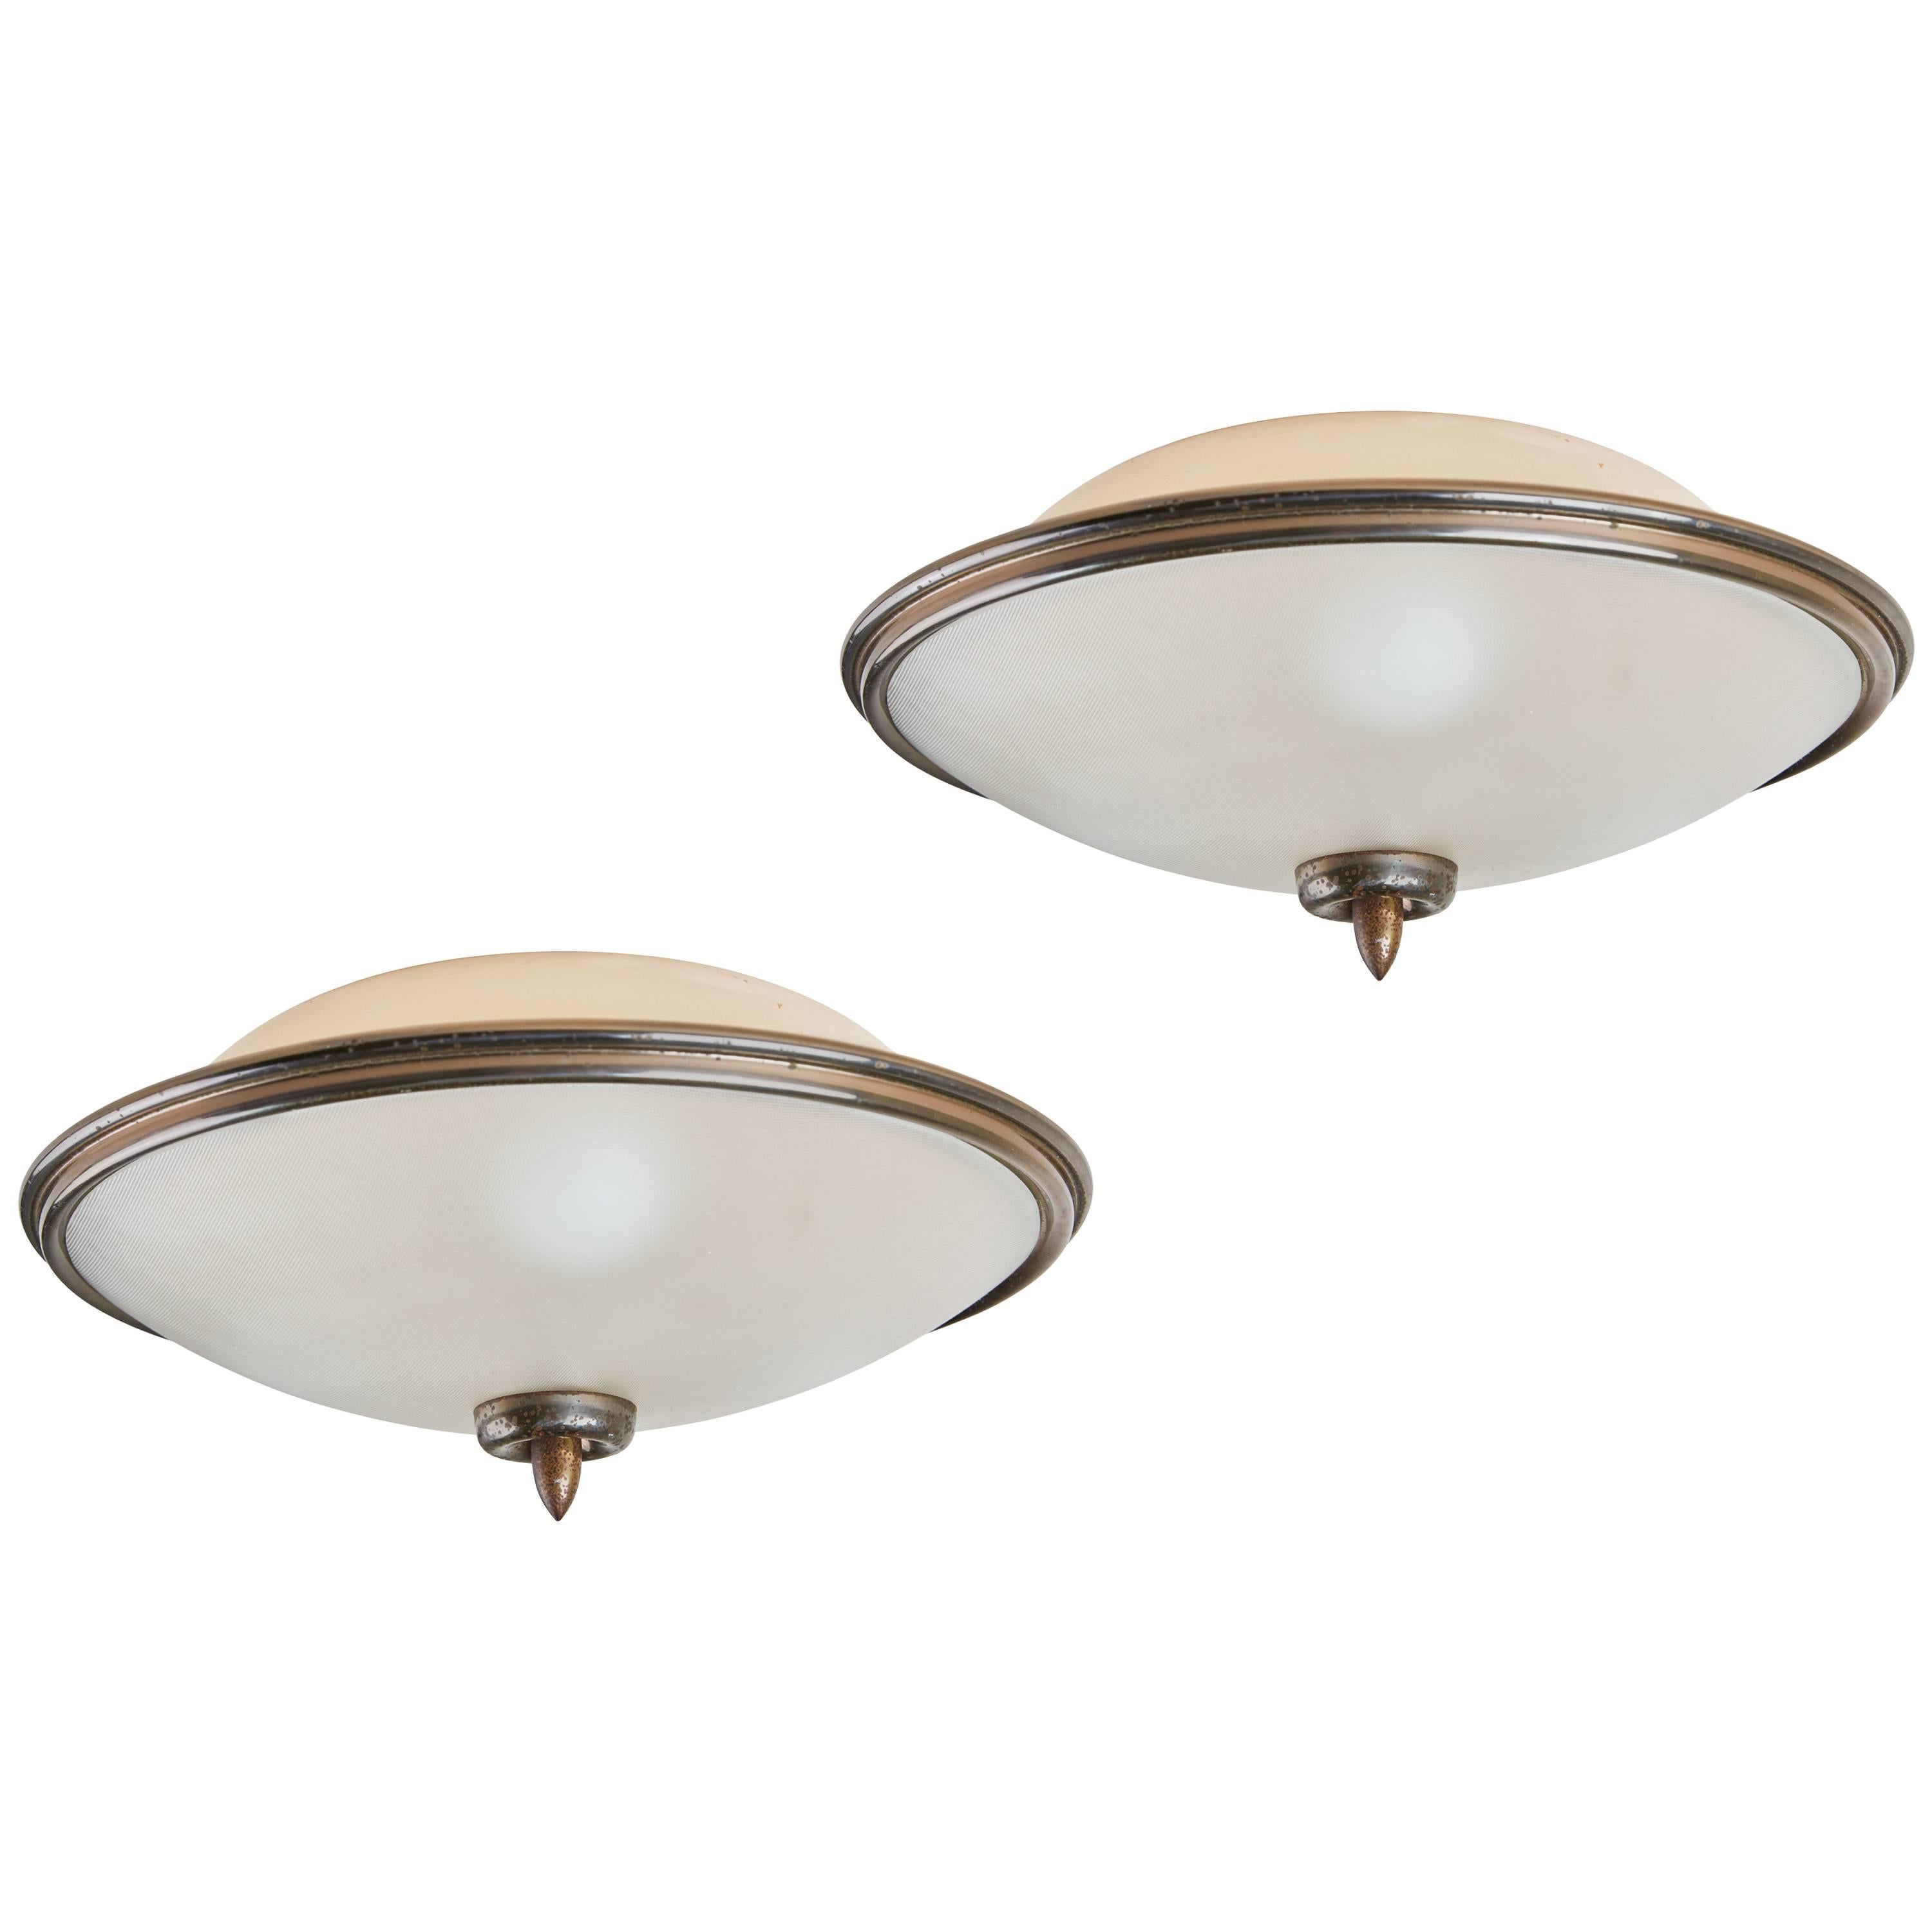 Pair of Brass and Glass Italian Flush mount Ceiling Lights